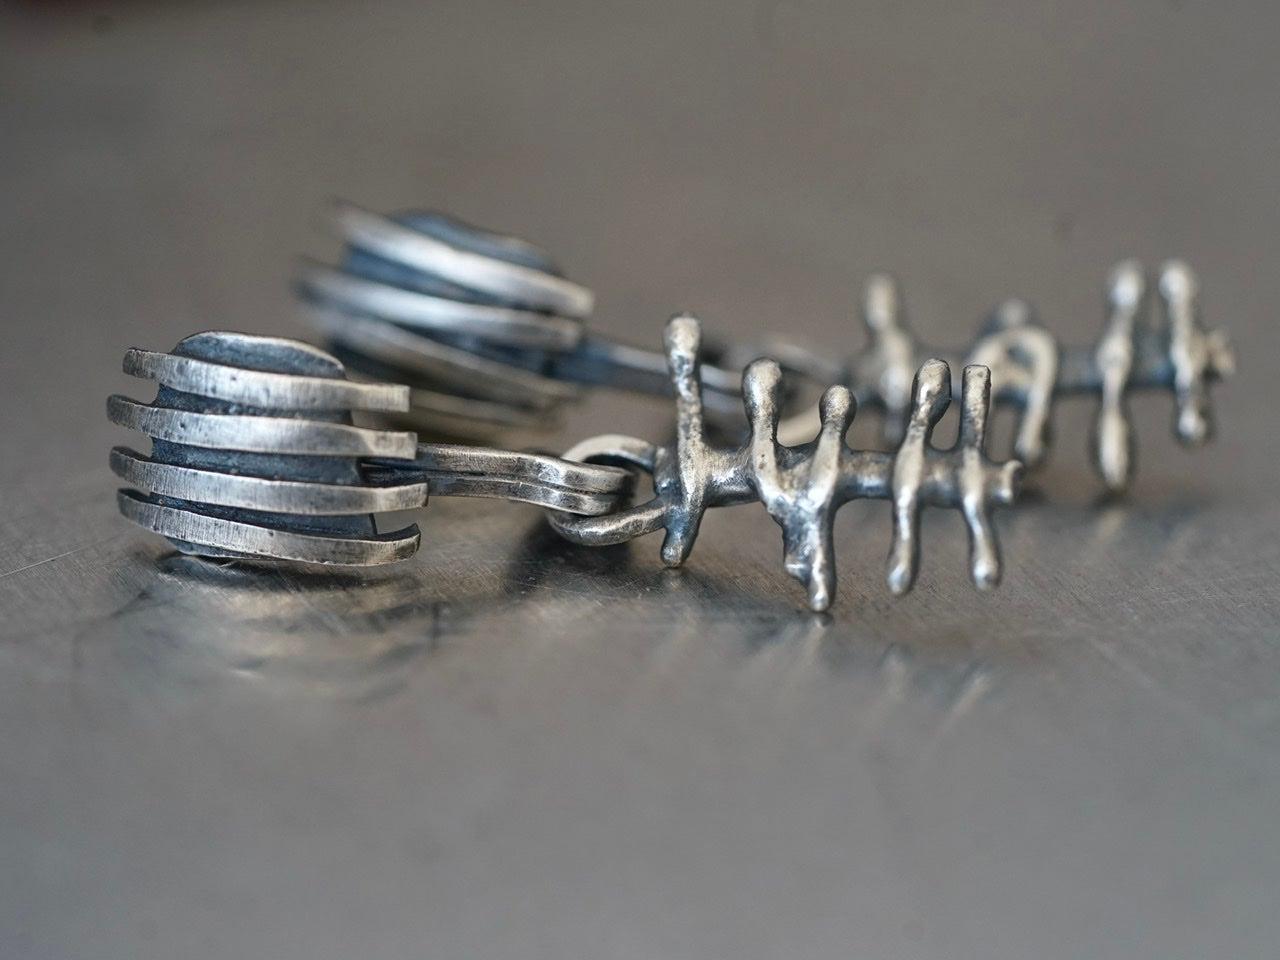 Remnants/ withered series, small skeletal sterling silver earrings